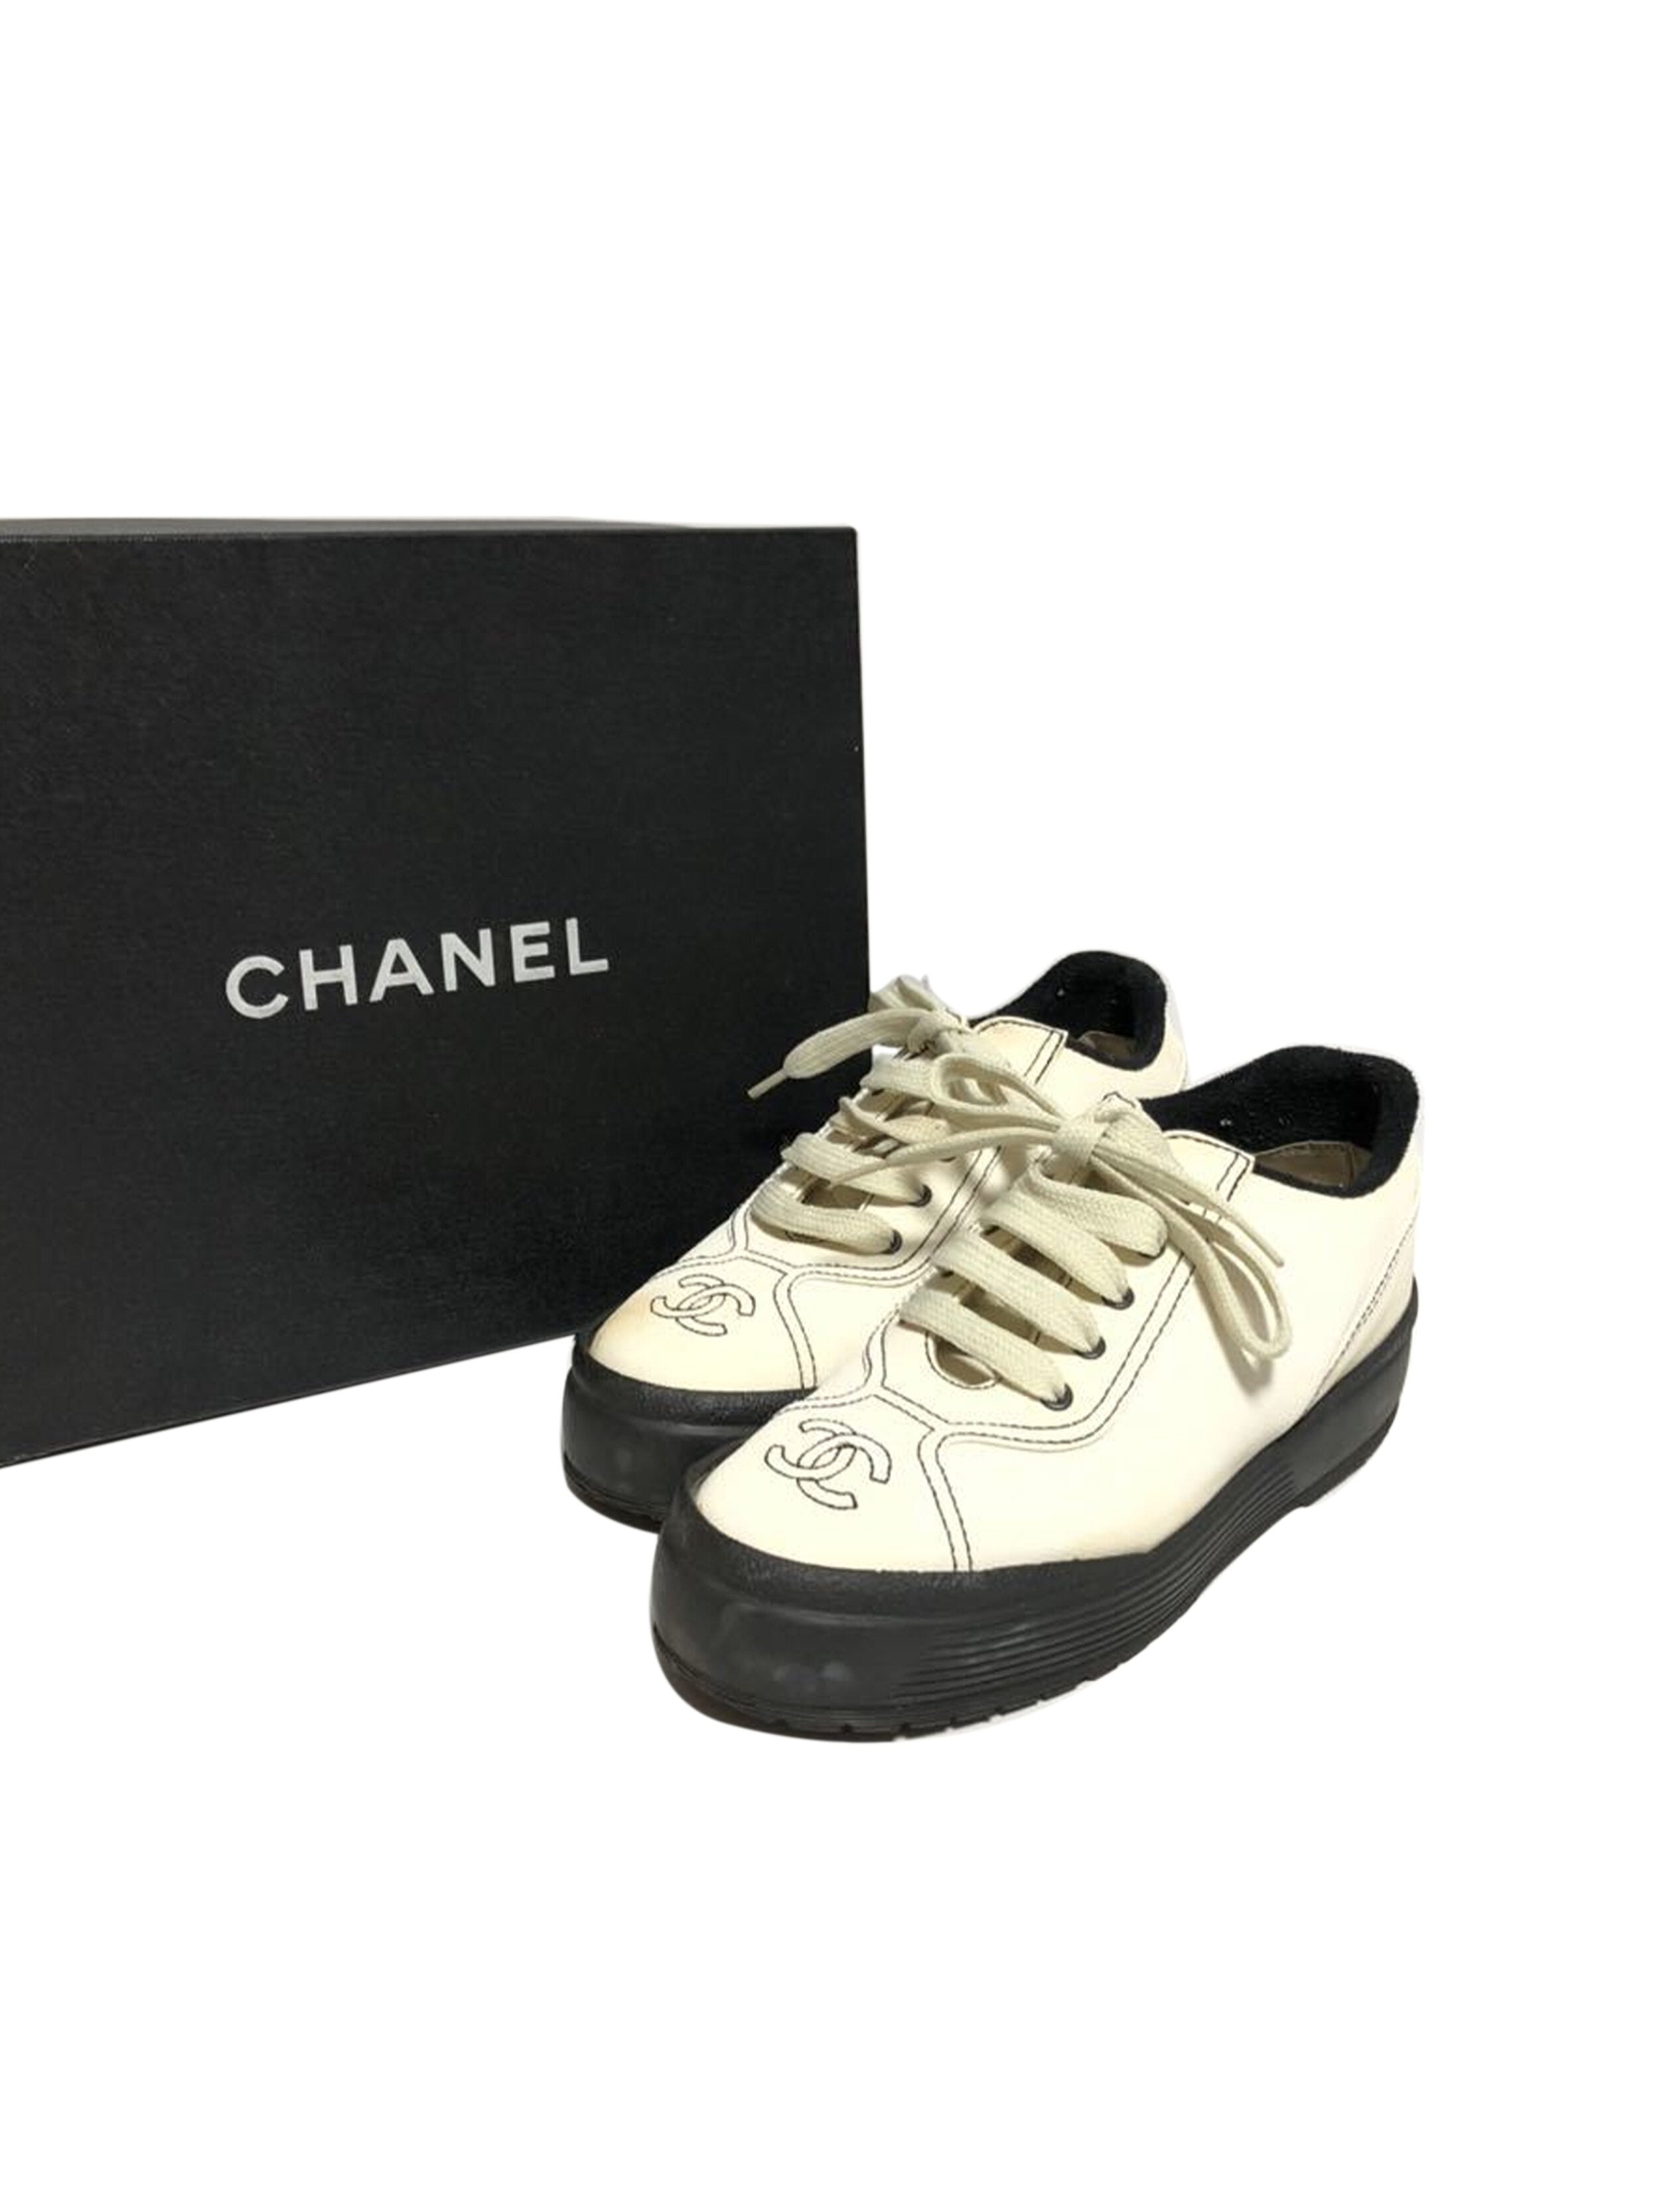 CHANEL Leather Athletic Shoes for Women for sale